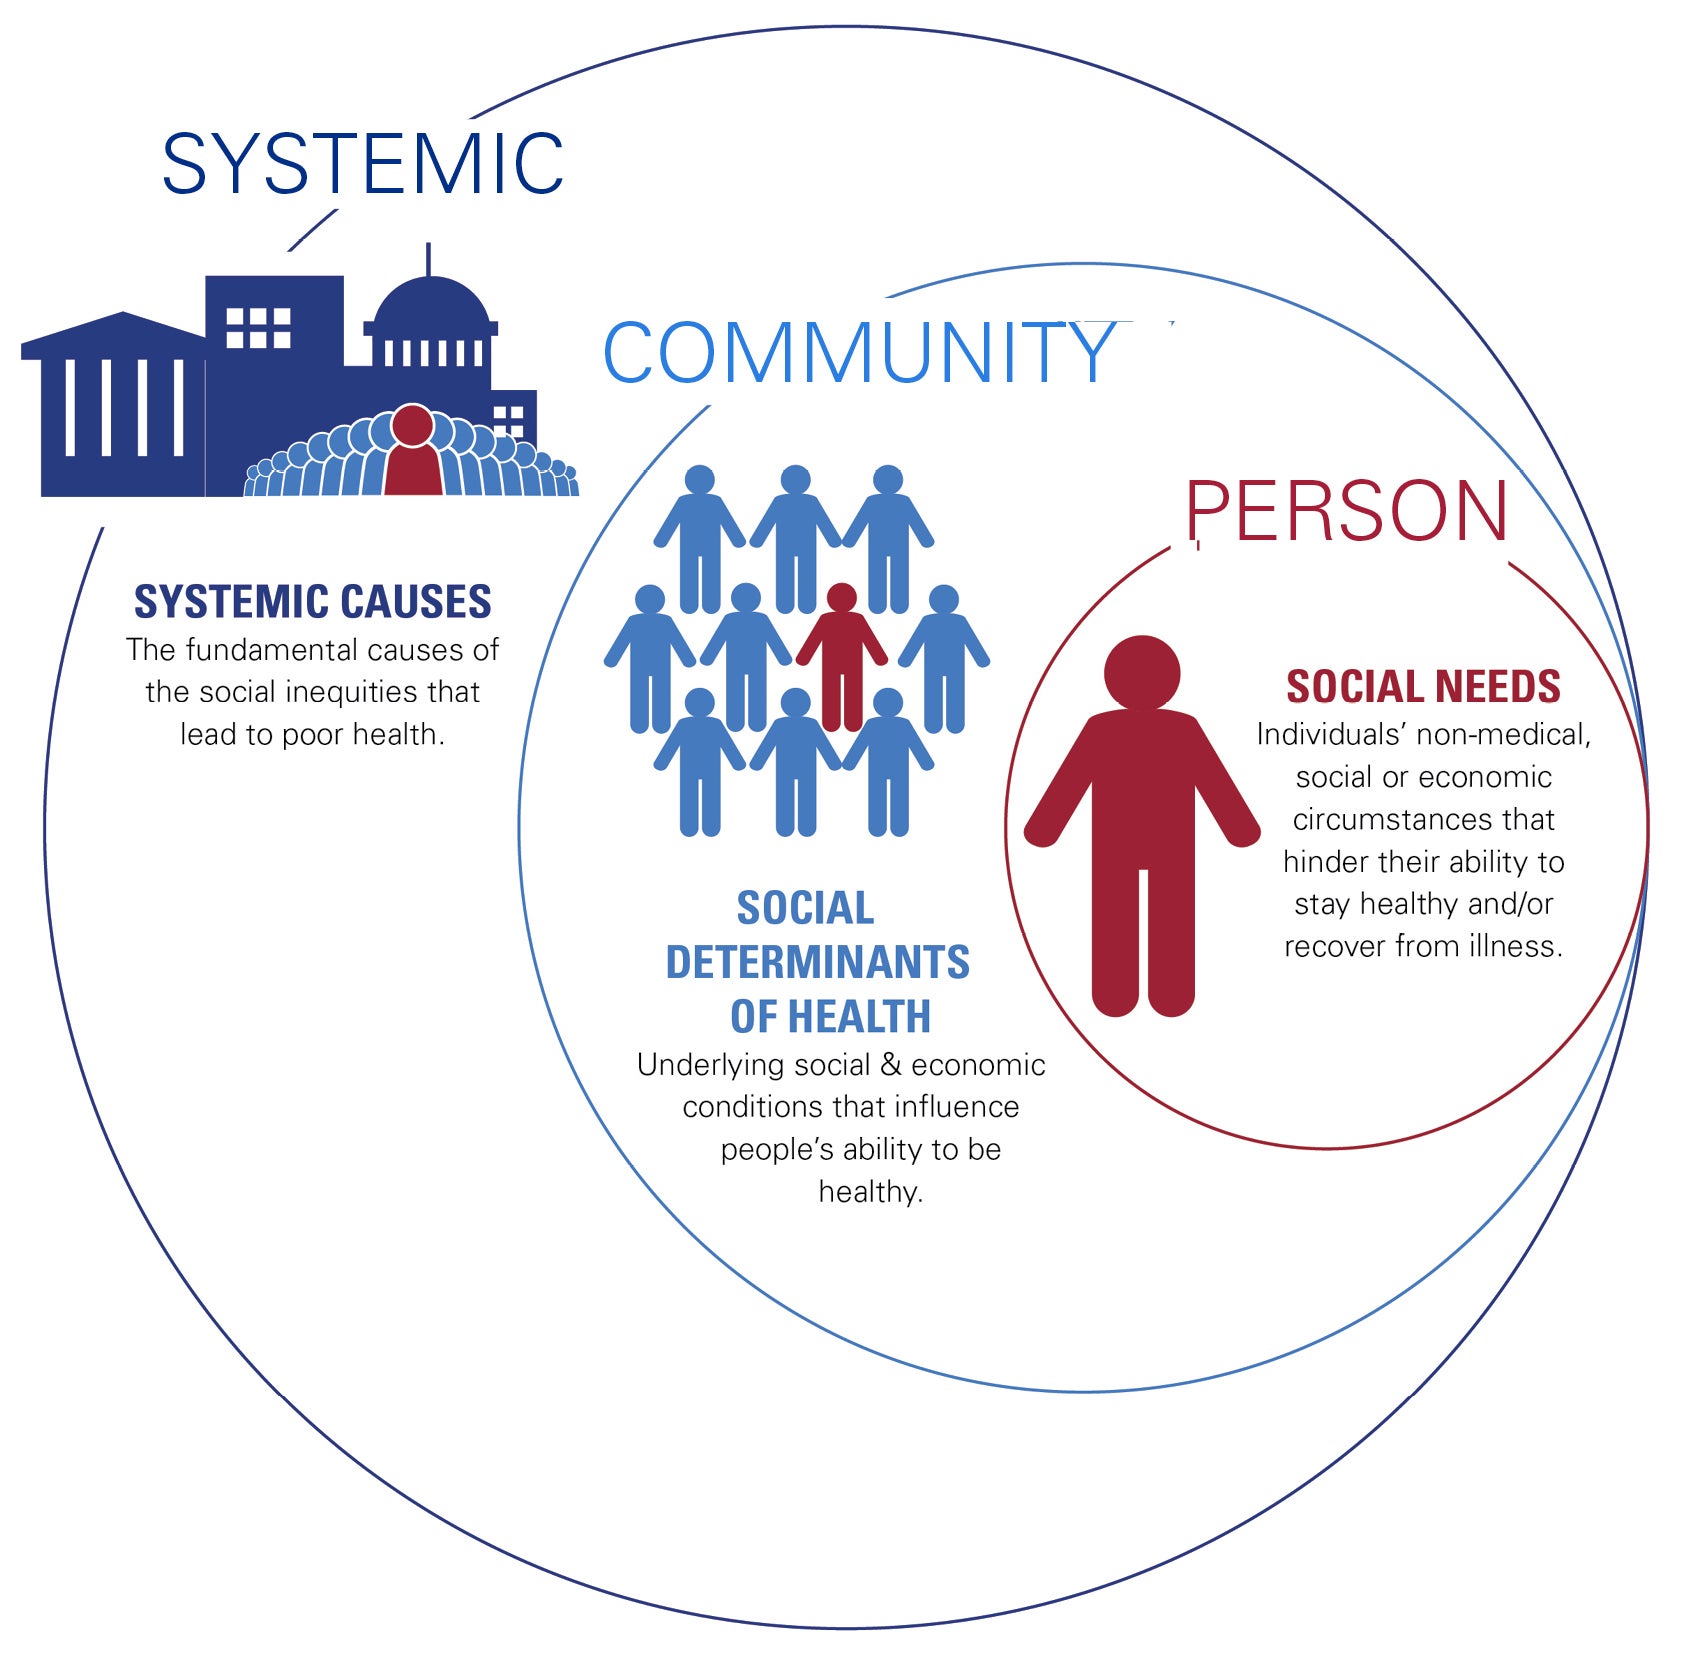 Societal Factors that Influence Health: A Framework for Hospitals. Three circles of different sizes with the small circle inside the medium circle, which are both inside the large circle. The large circle is labeled Systemic. Systemic Causes: The fundamental causes of the social inequities that lead to poor health. The medium circle is labeled Community. Social Determinants of Health: Underlying social and economic conditions that influence people's ability to be healthy. The small circle is labeled Person. Social Needs: Individuals' non-medical, social or economic circumstances that hinder their ability to stay healthy and/or recover from illness.